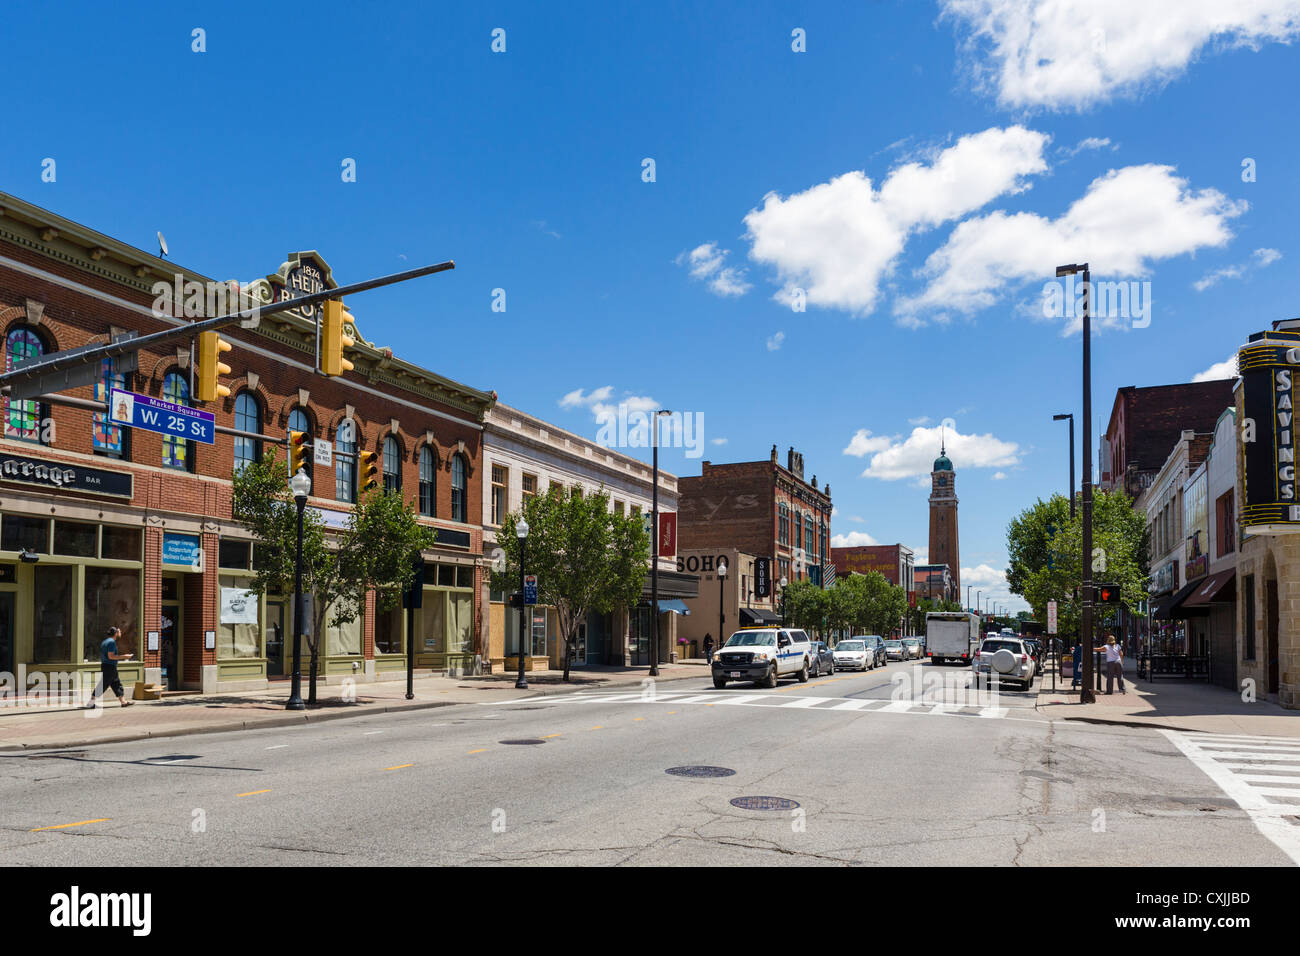 West 25th Street looking towards Market Square, Ohio City district, Cleveland, Ohio, USA Stock Photo